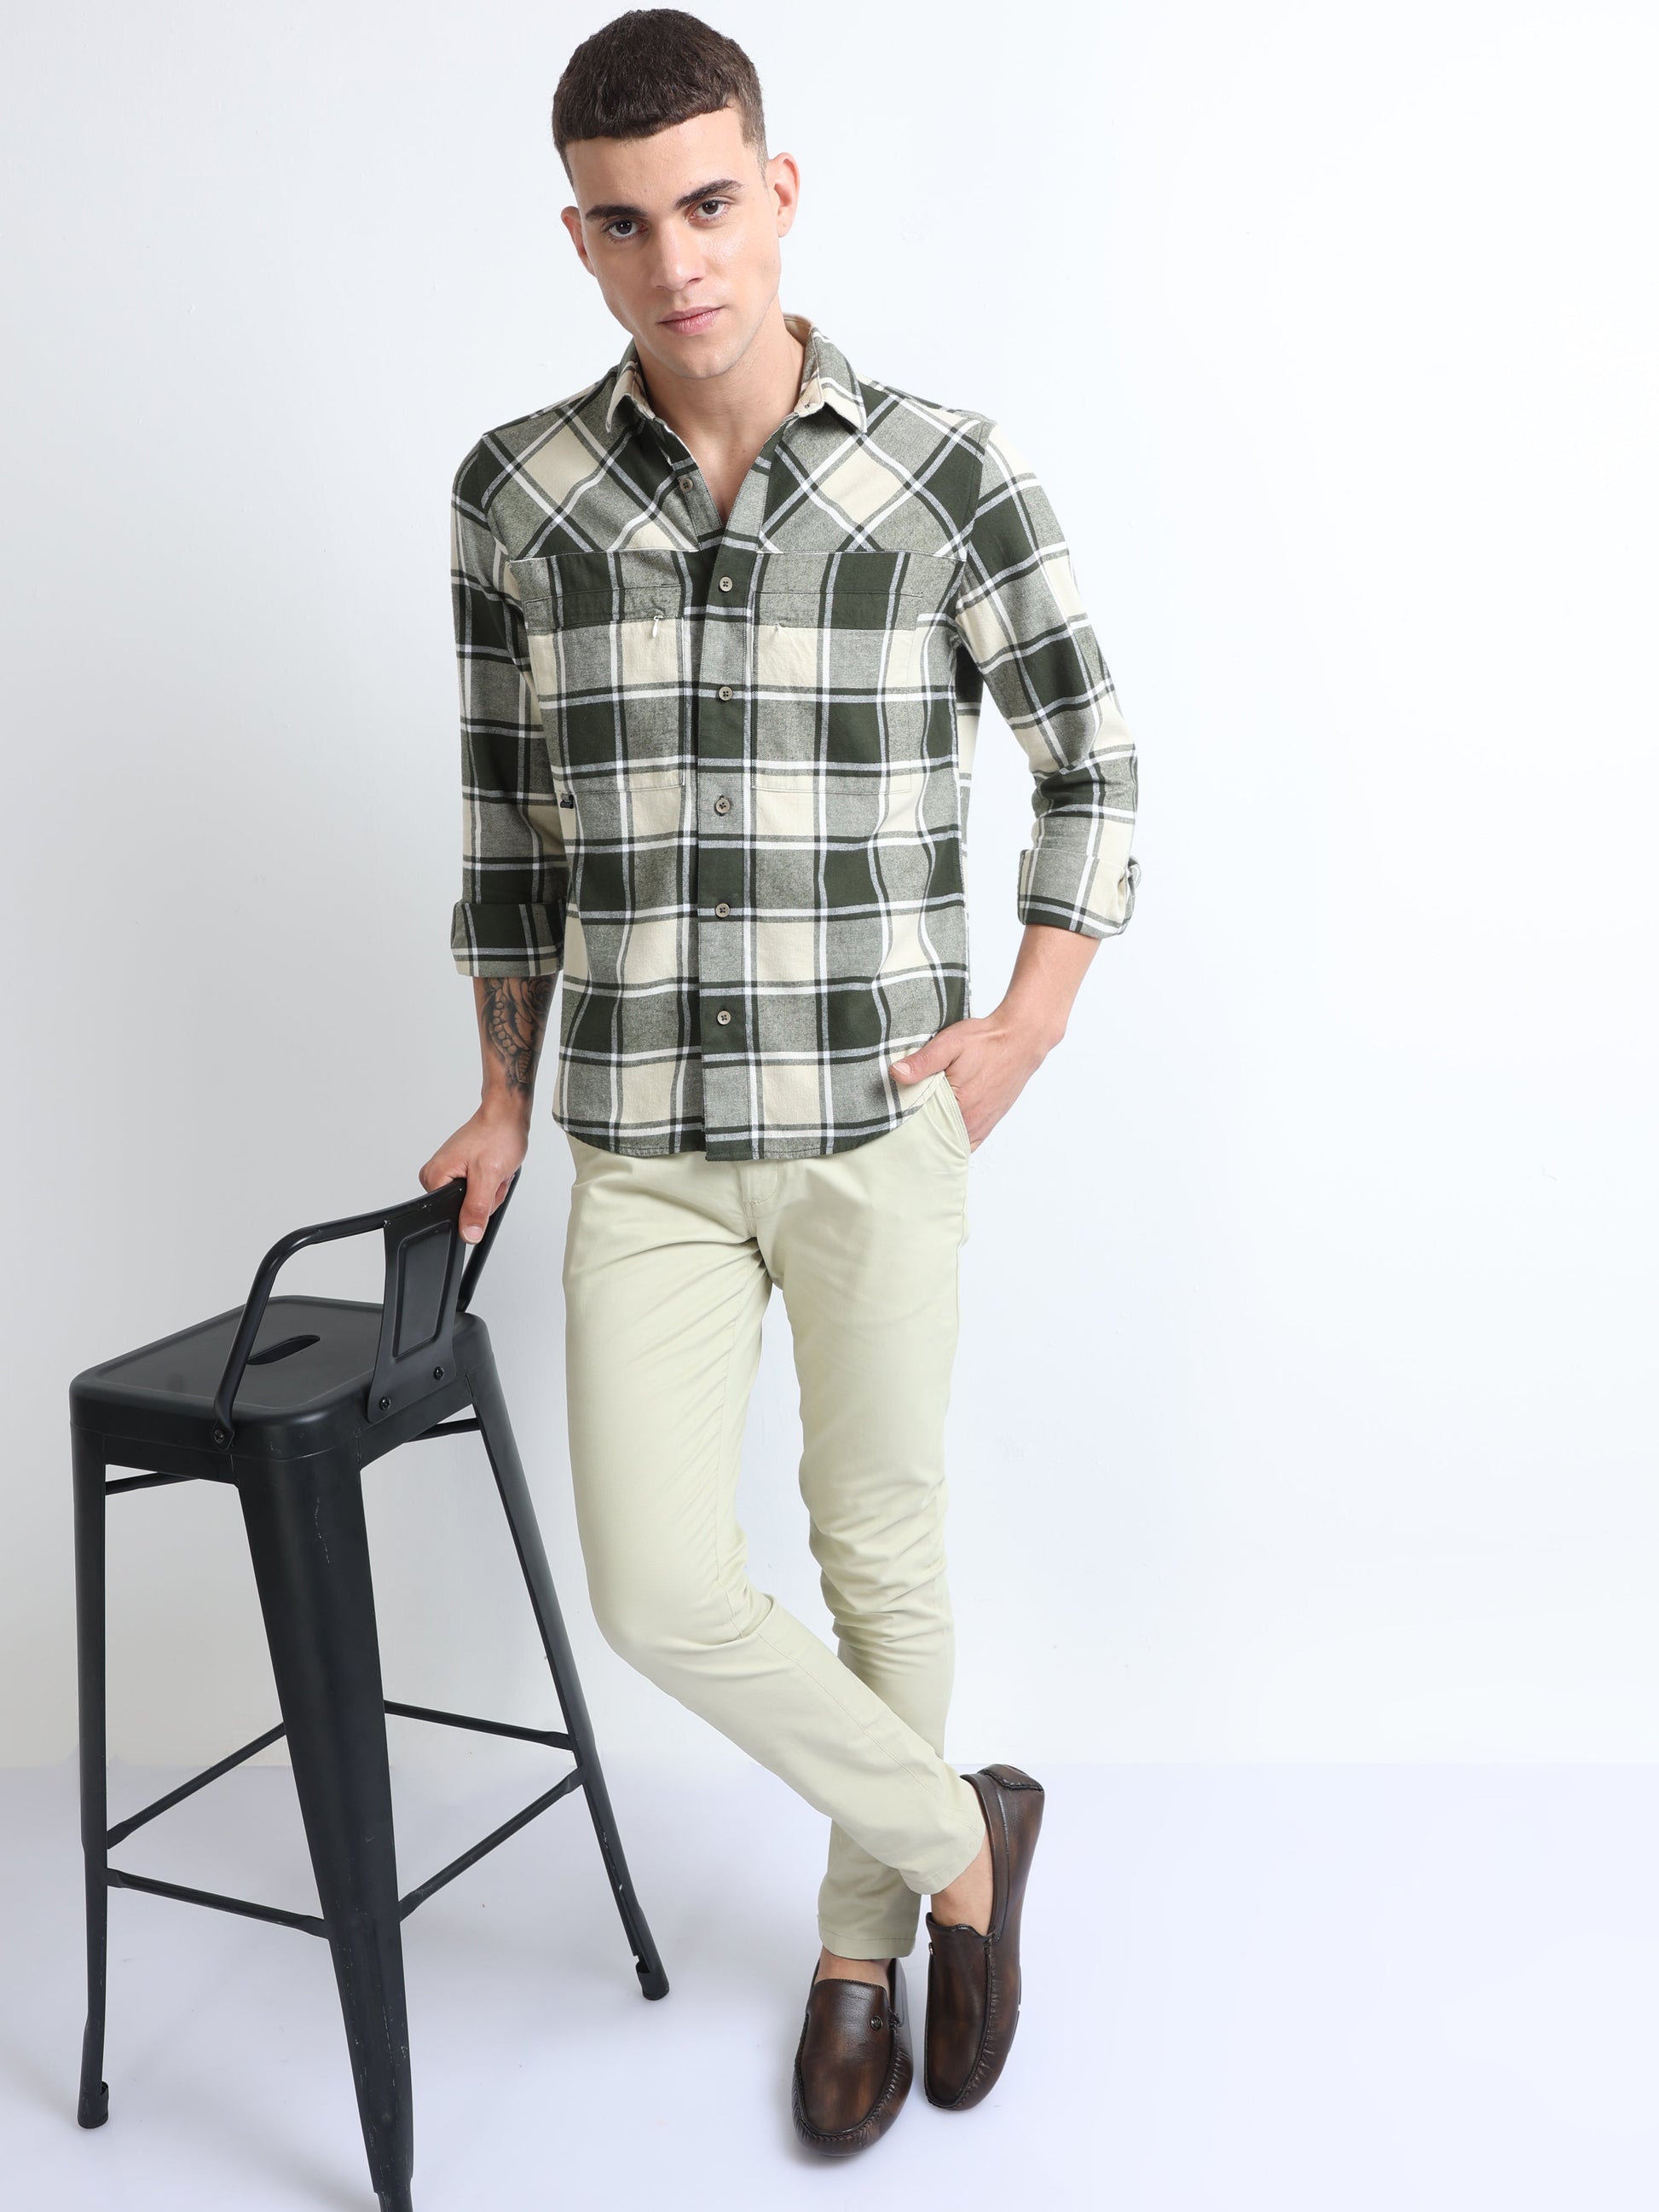 Buy Mens Double Pocket Twill Shirt Online.